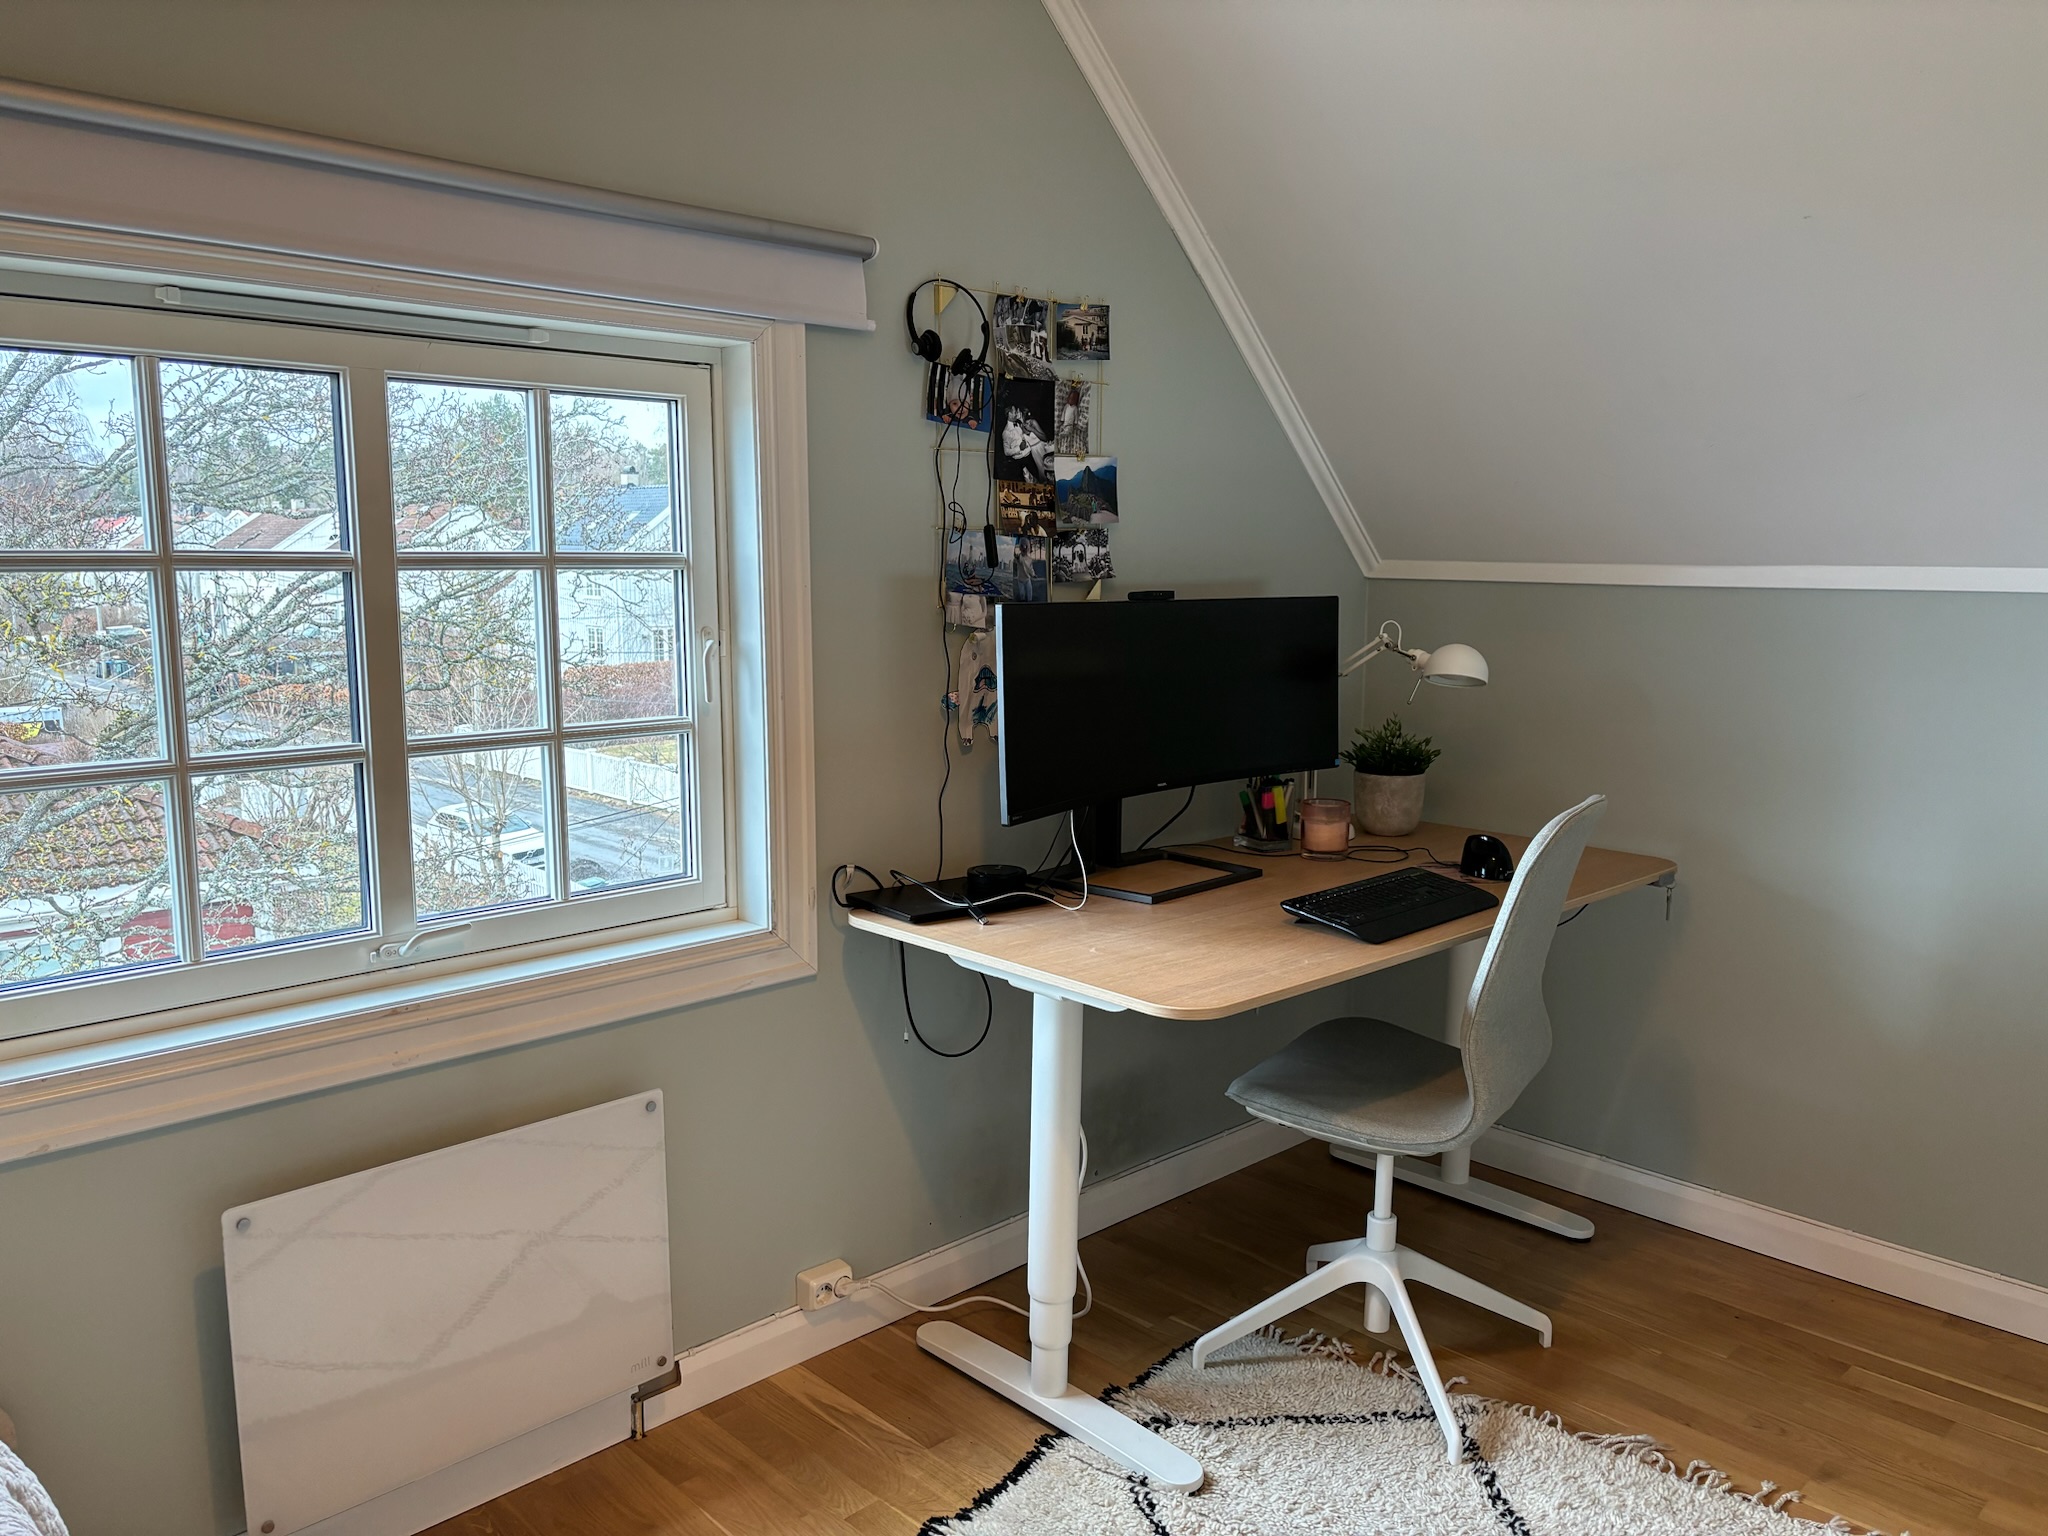 Bedroom 5 with working desk with monitors